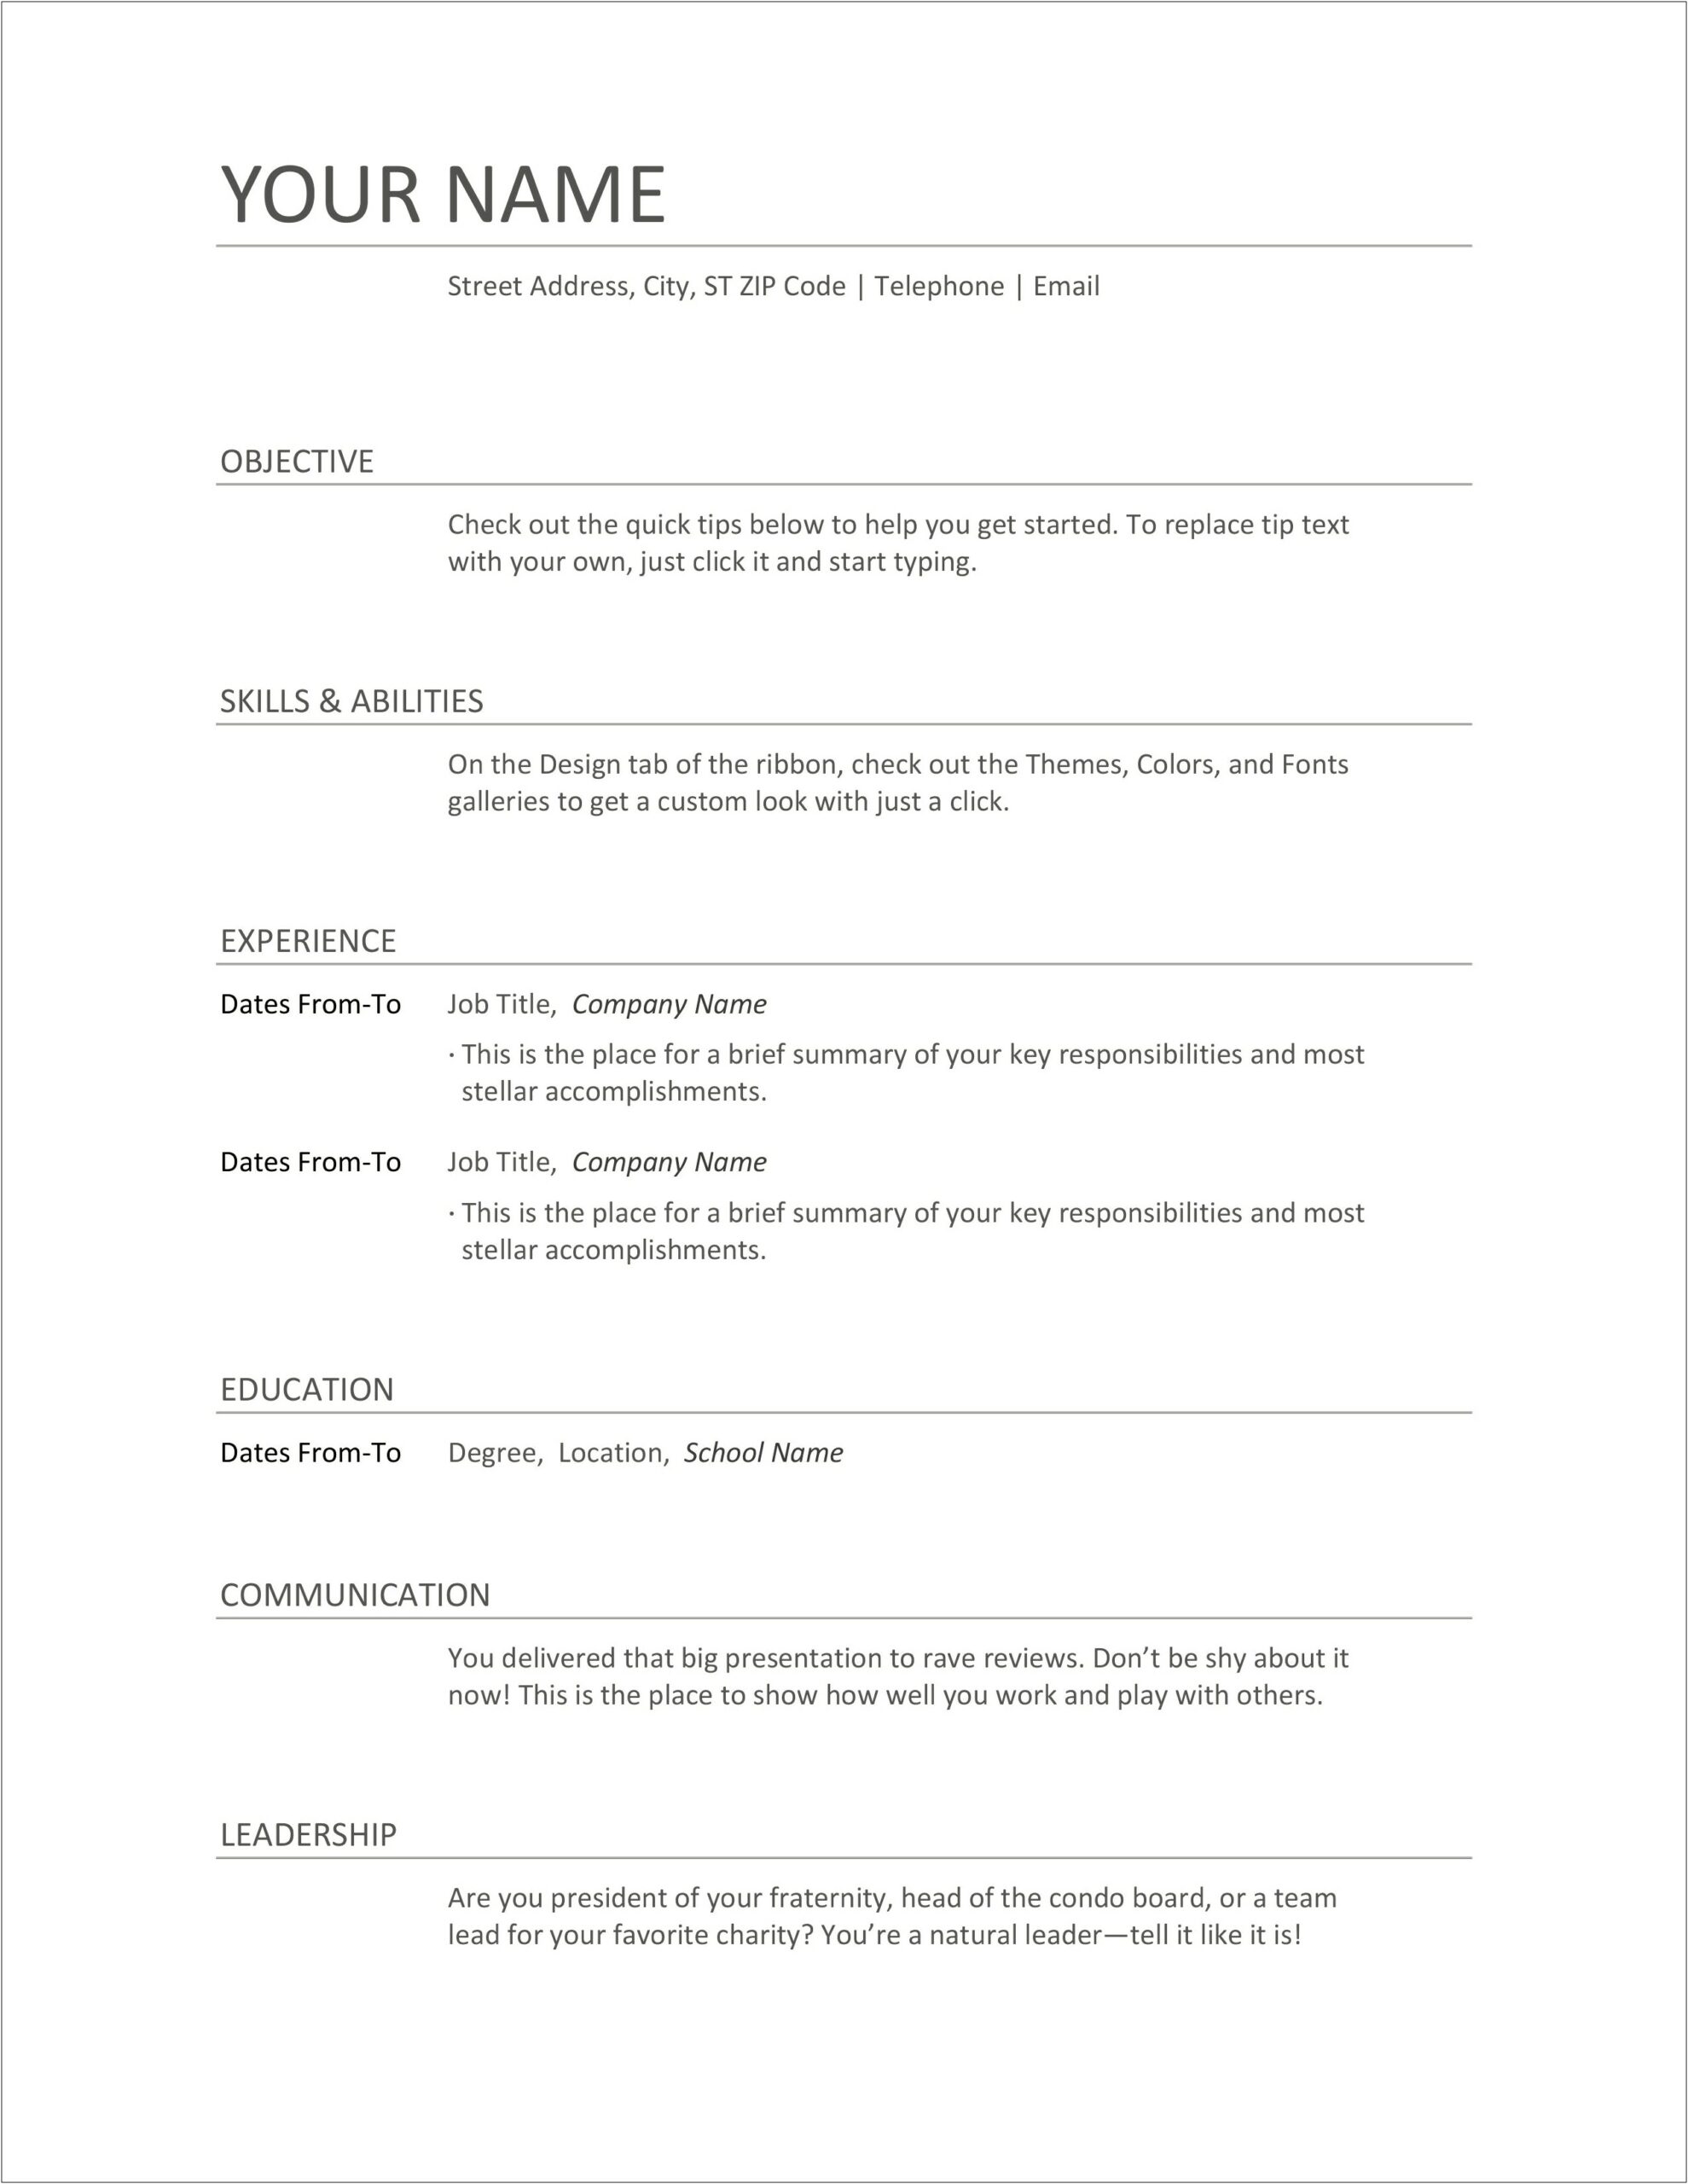 Example Of Format In Making A Resume